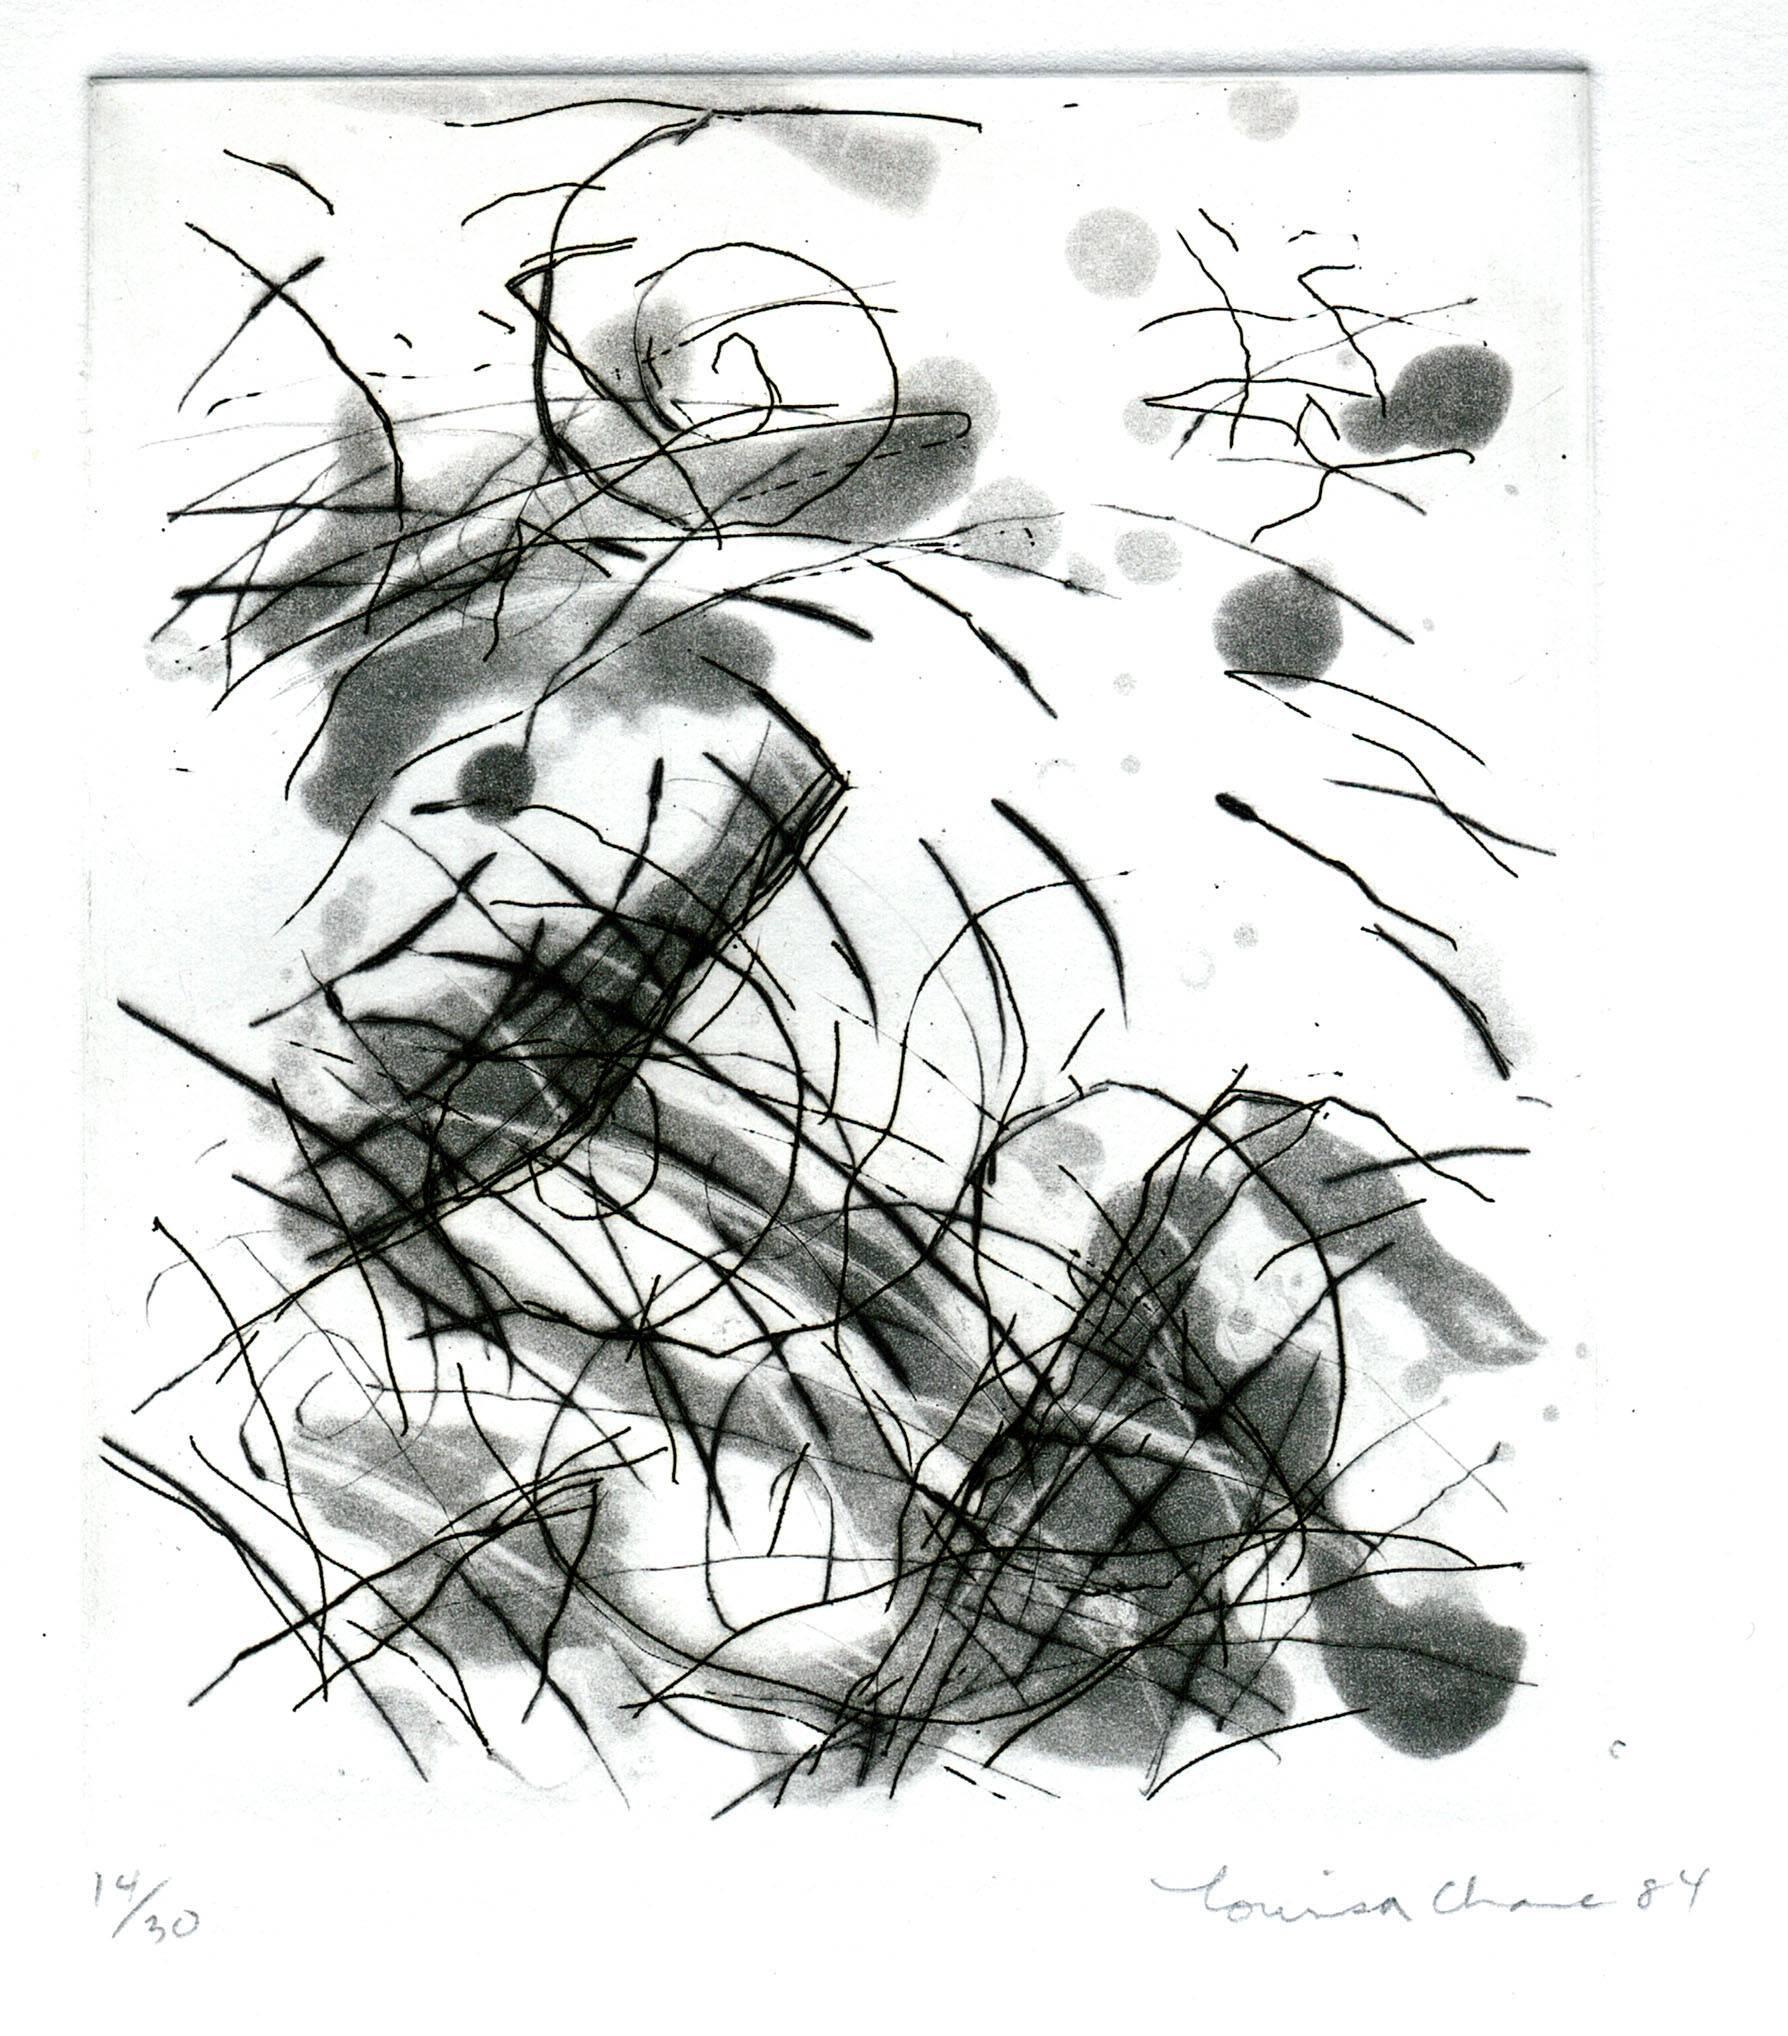 Portfolio of Six Untitled Etchings - Print by Louisa Chase